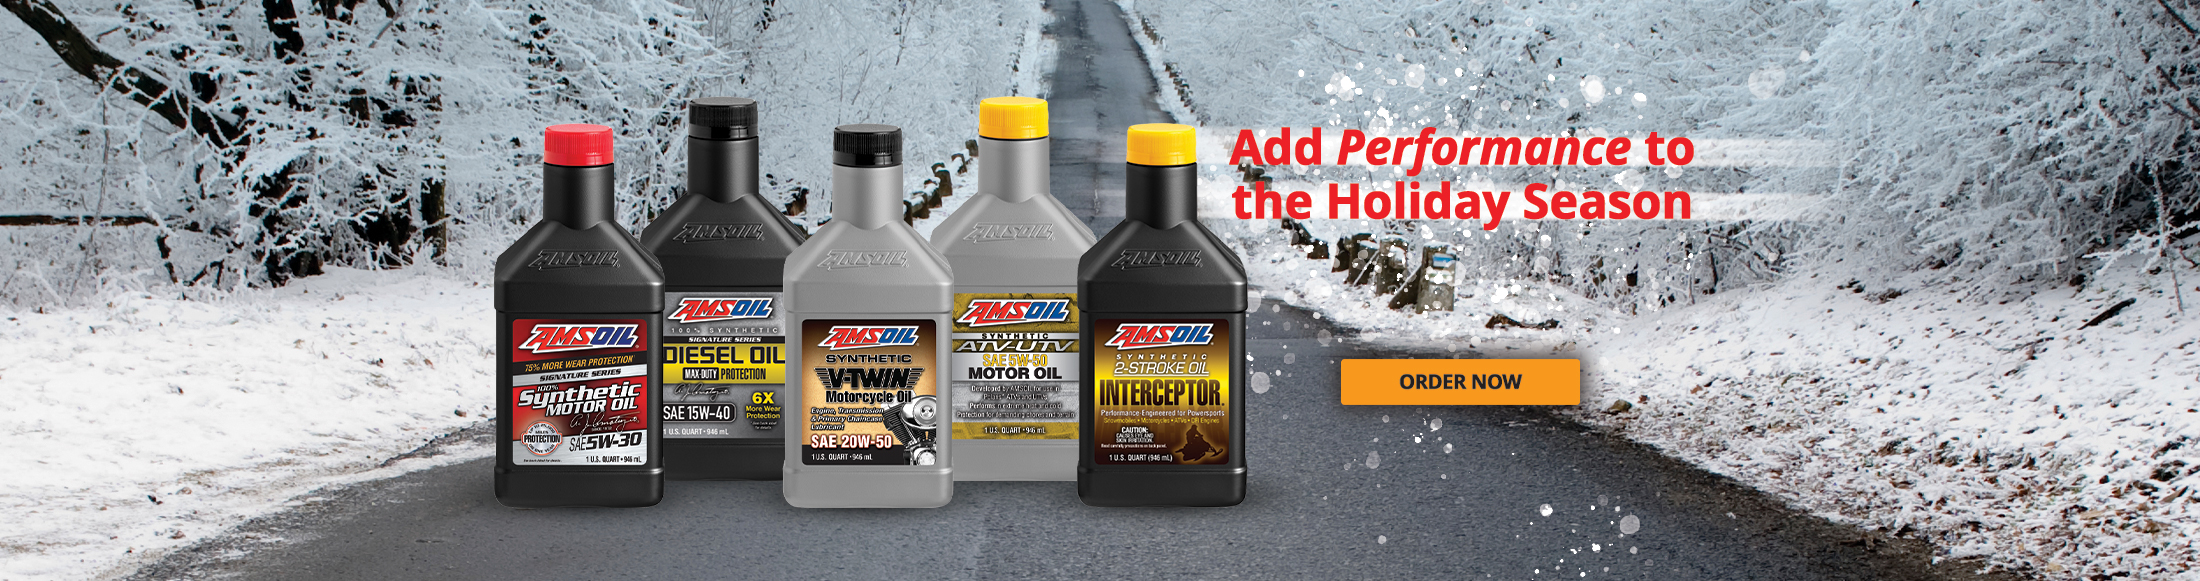 Add performance to the holiday season. Order AMSOIL products now.